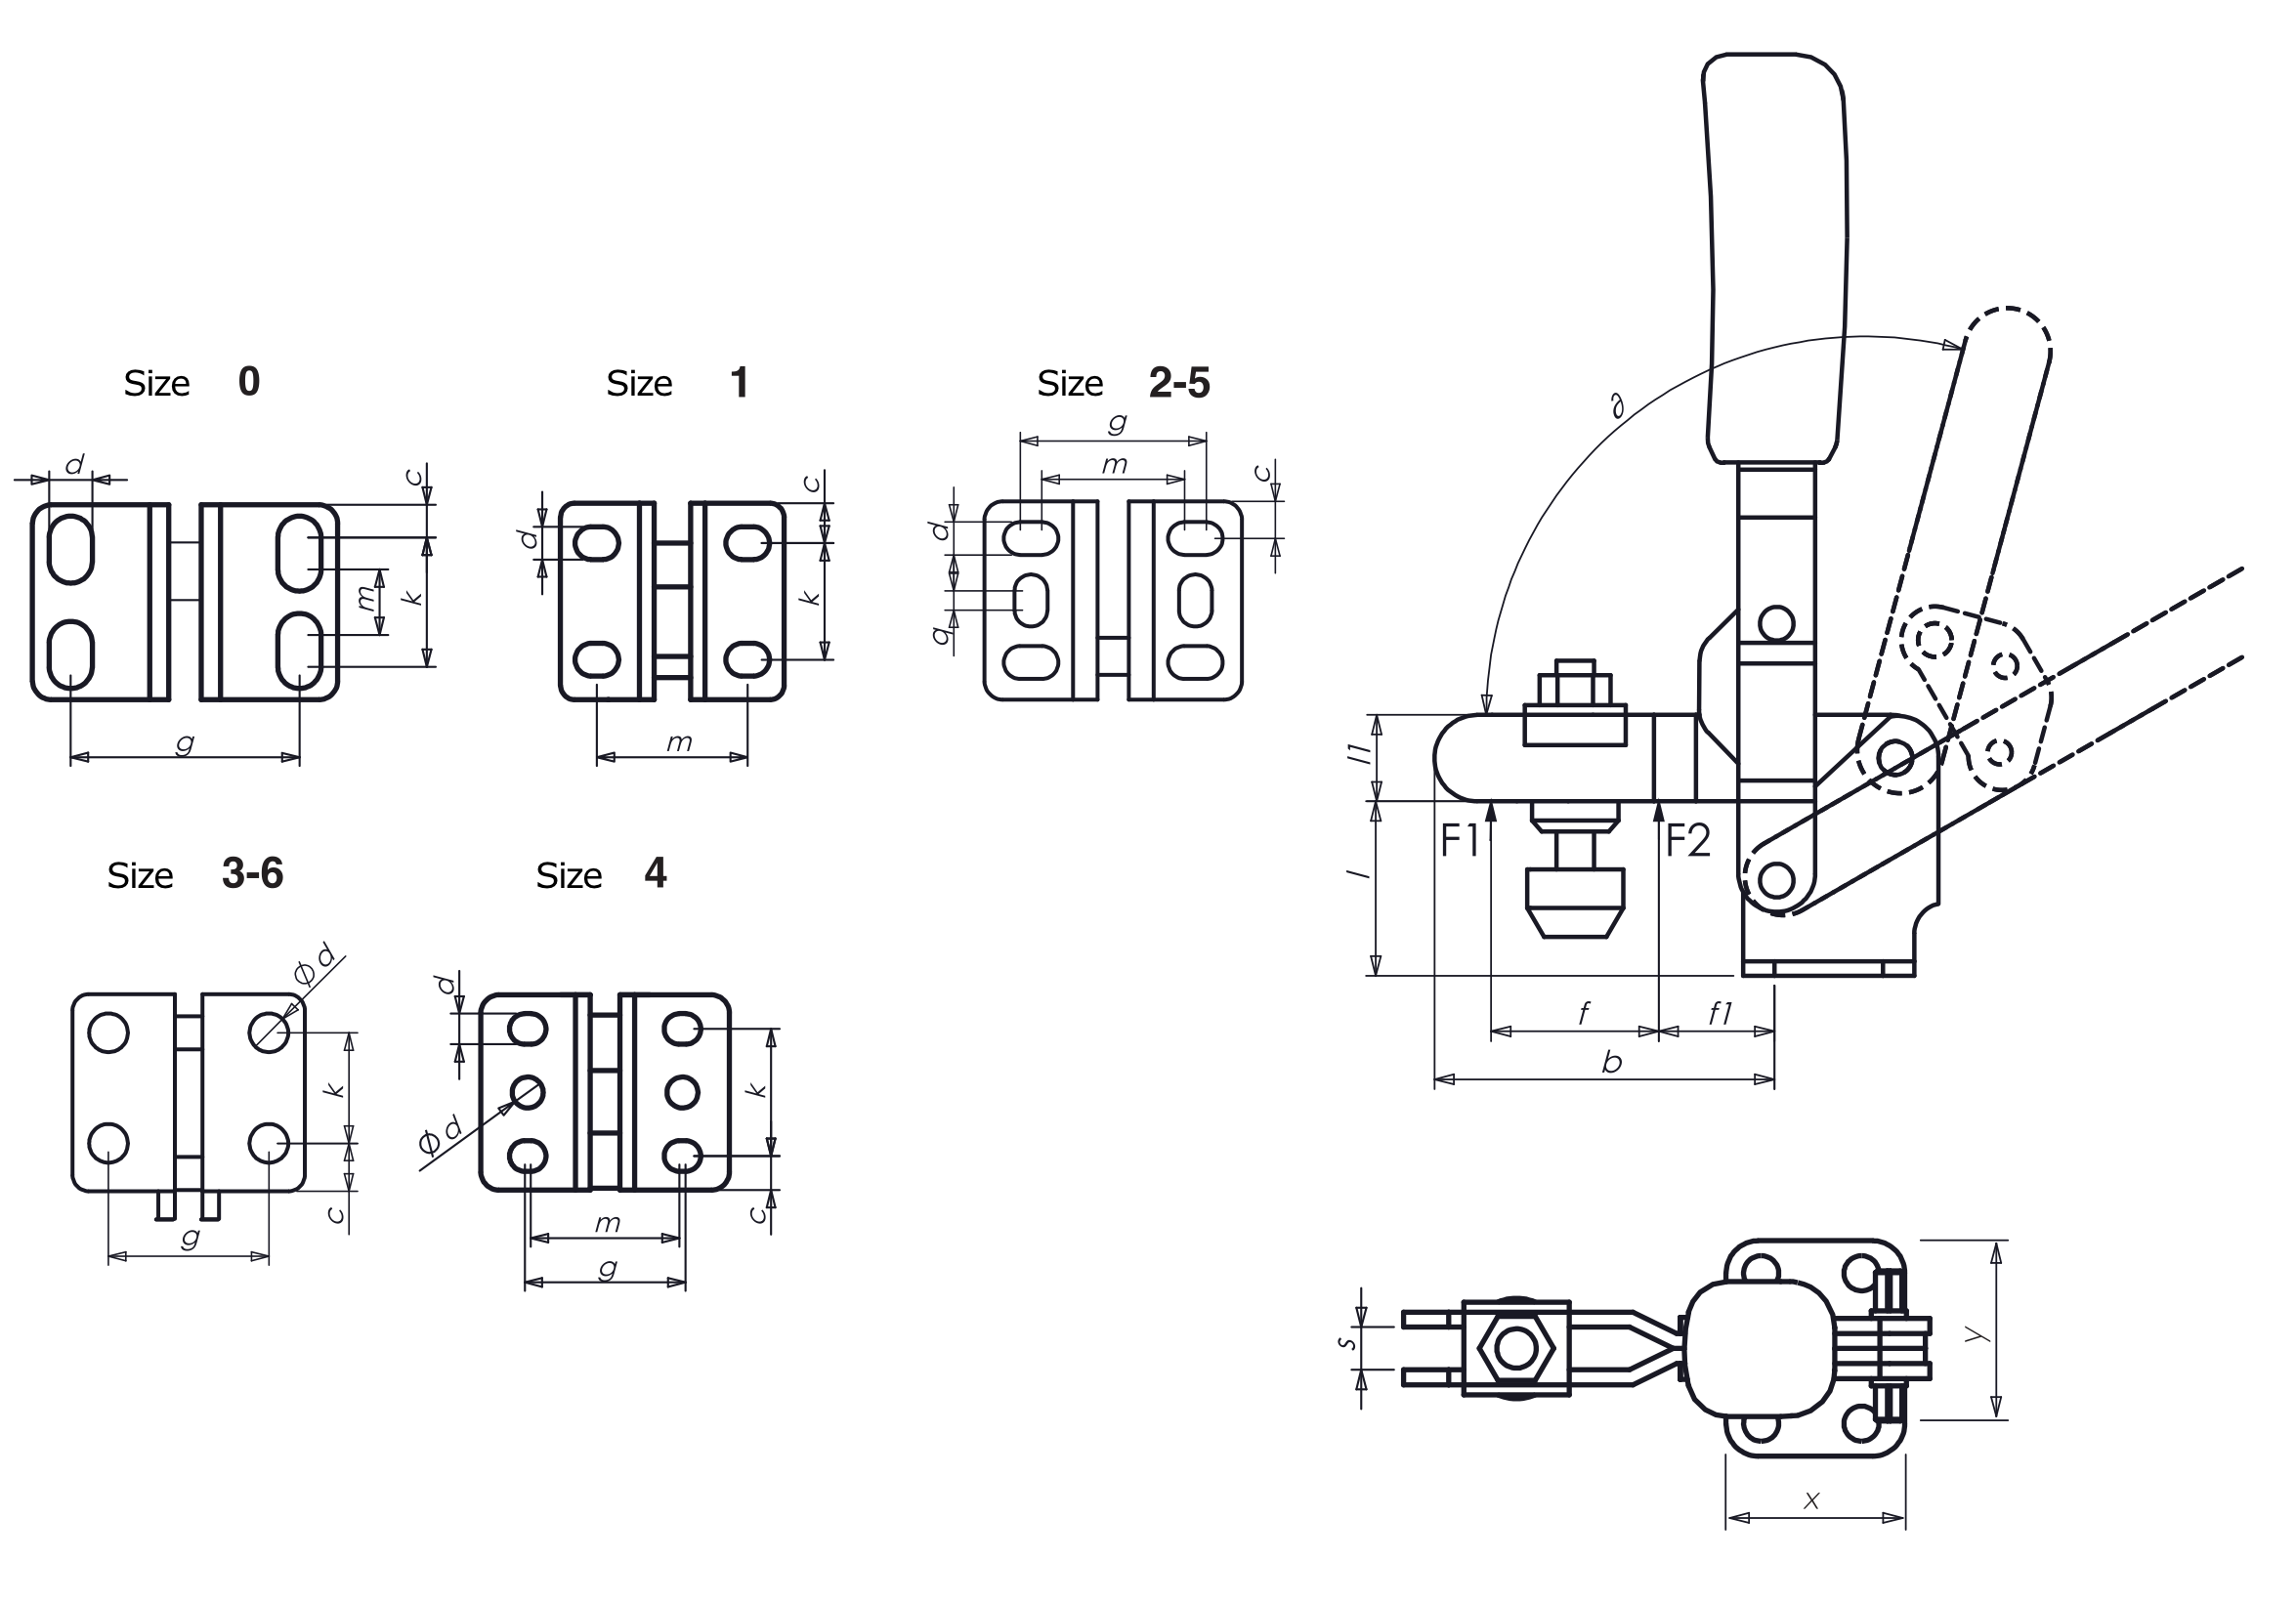 M10 Vertical toggle clamp with horizontal base and open clamping arm drawing and datasheet